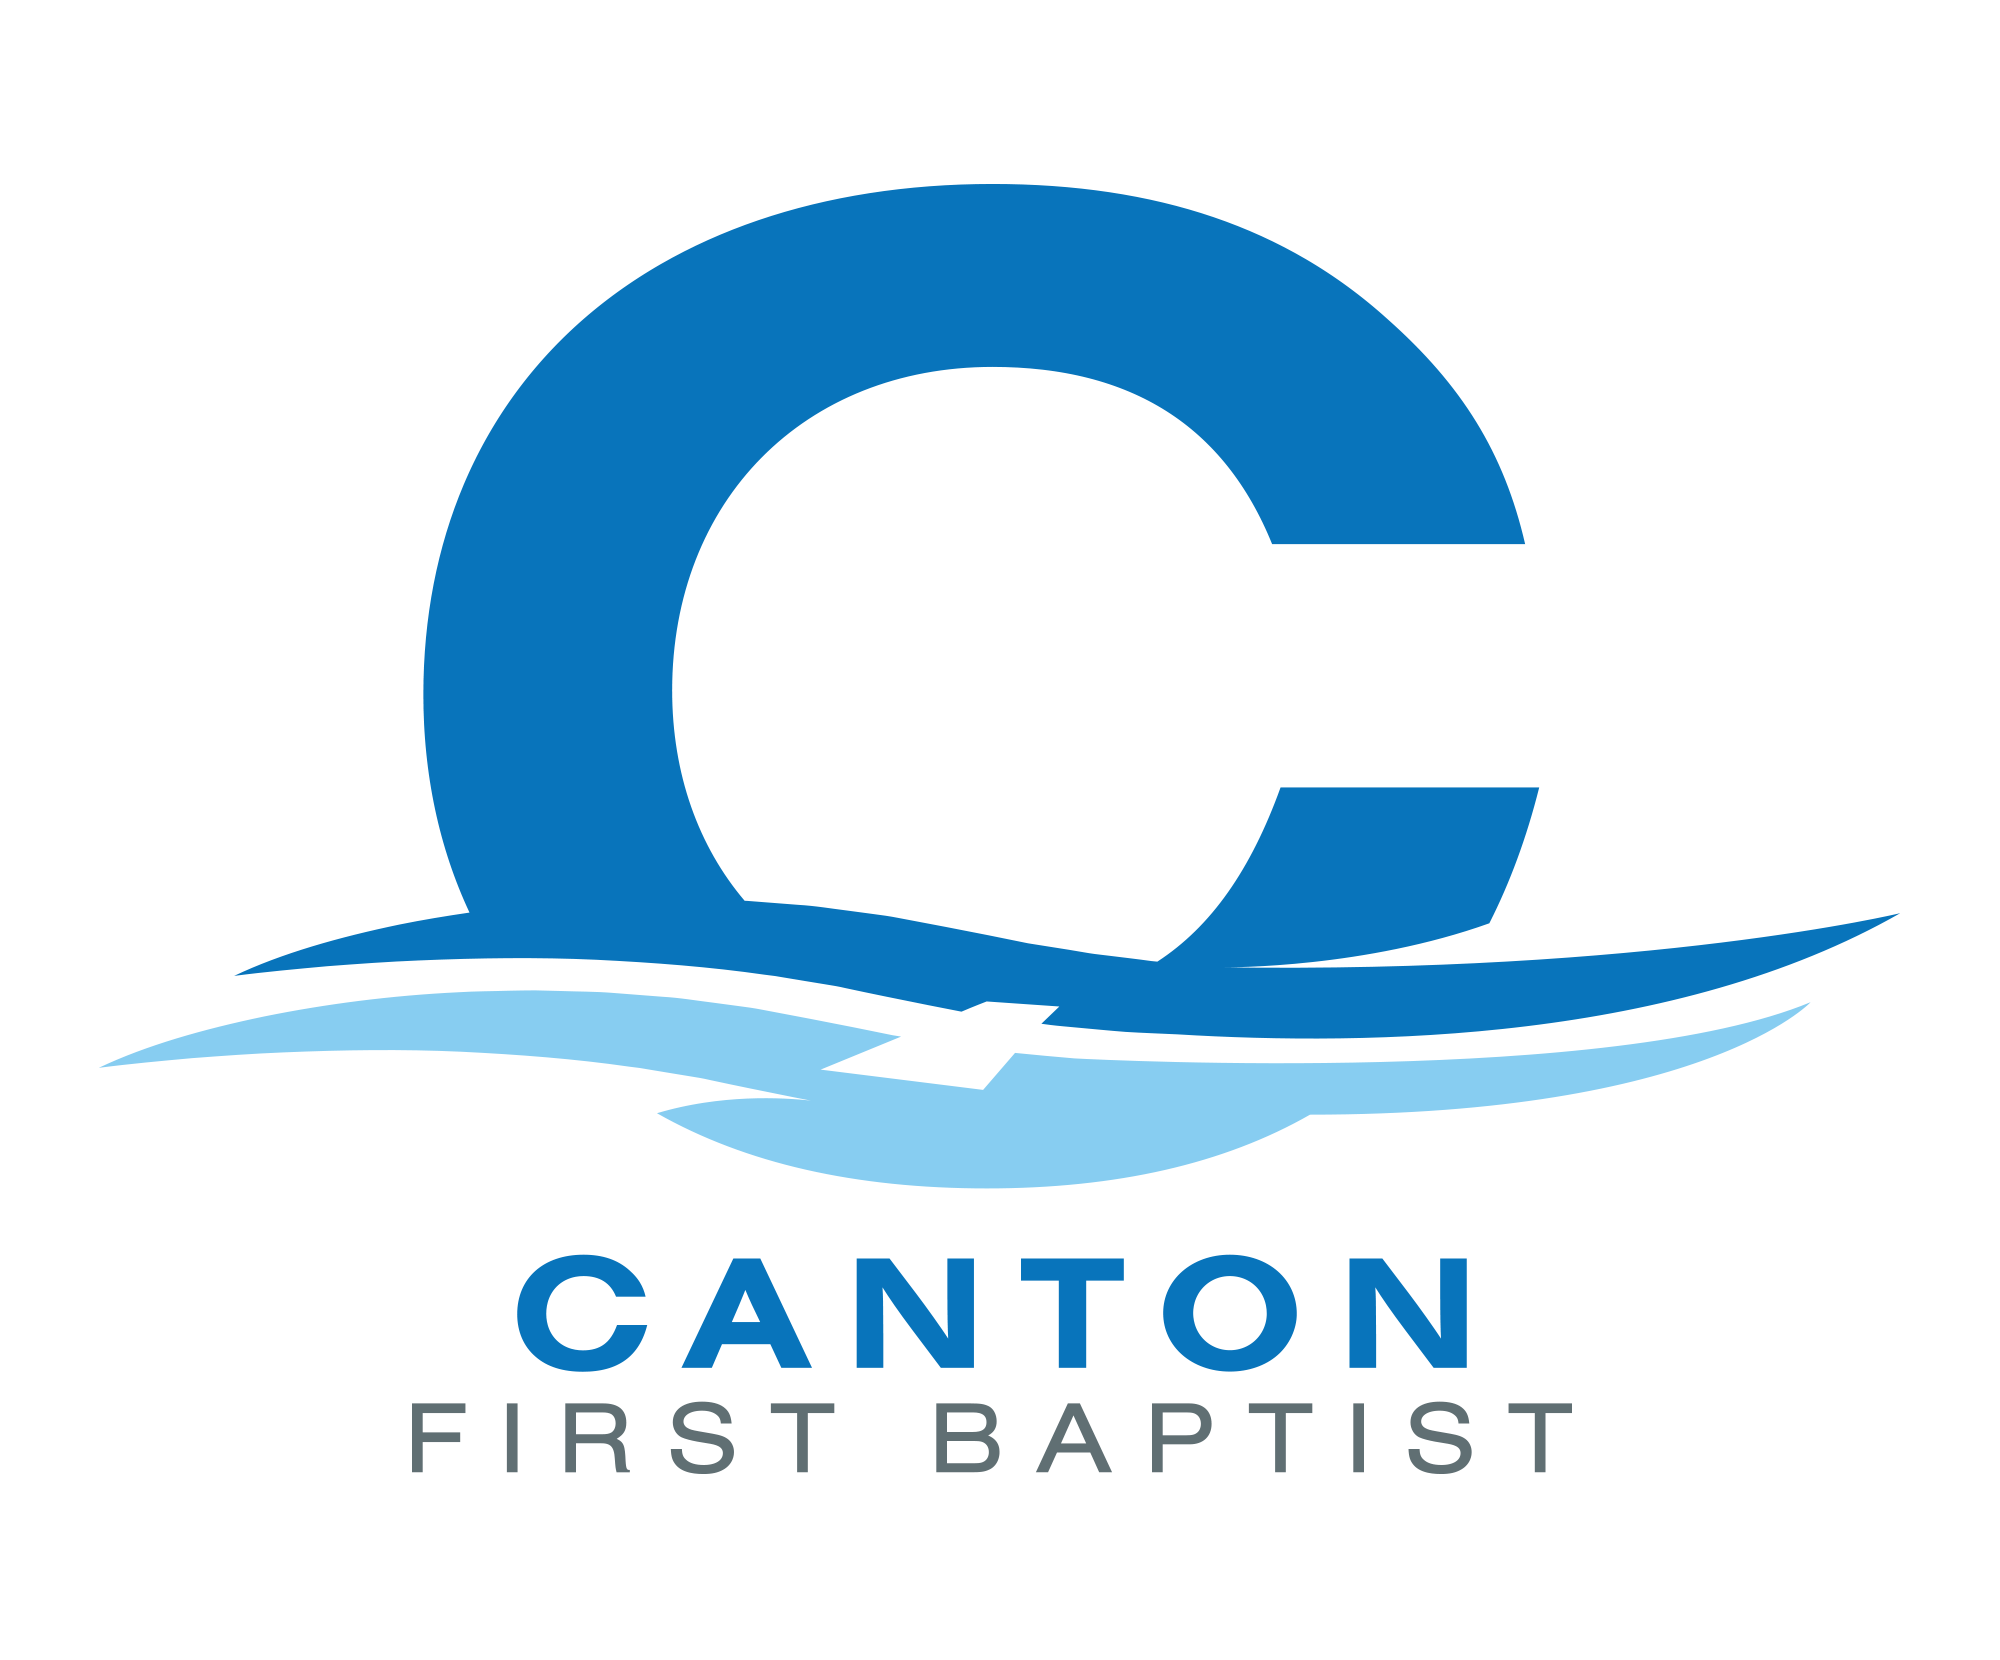 Mission Graphics was honored to help Canton First Baptist to rebrand